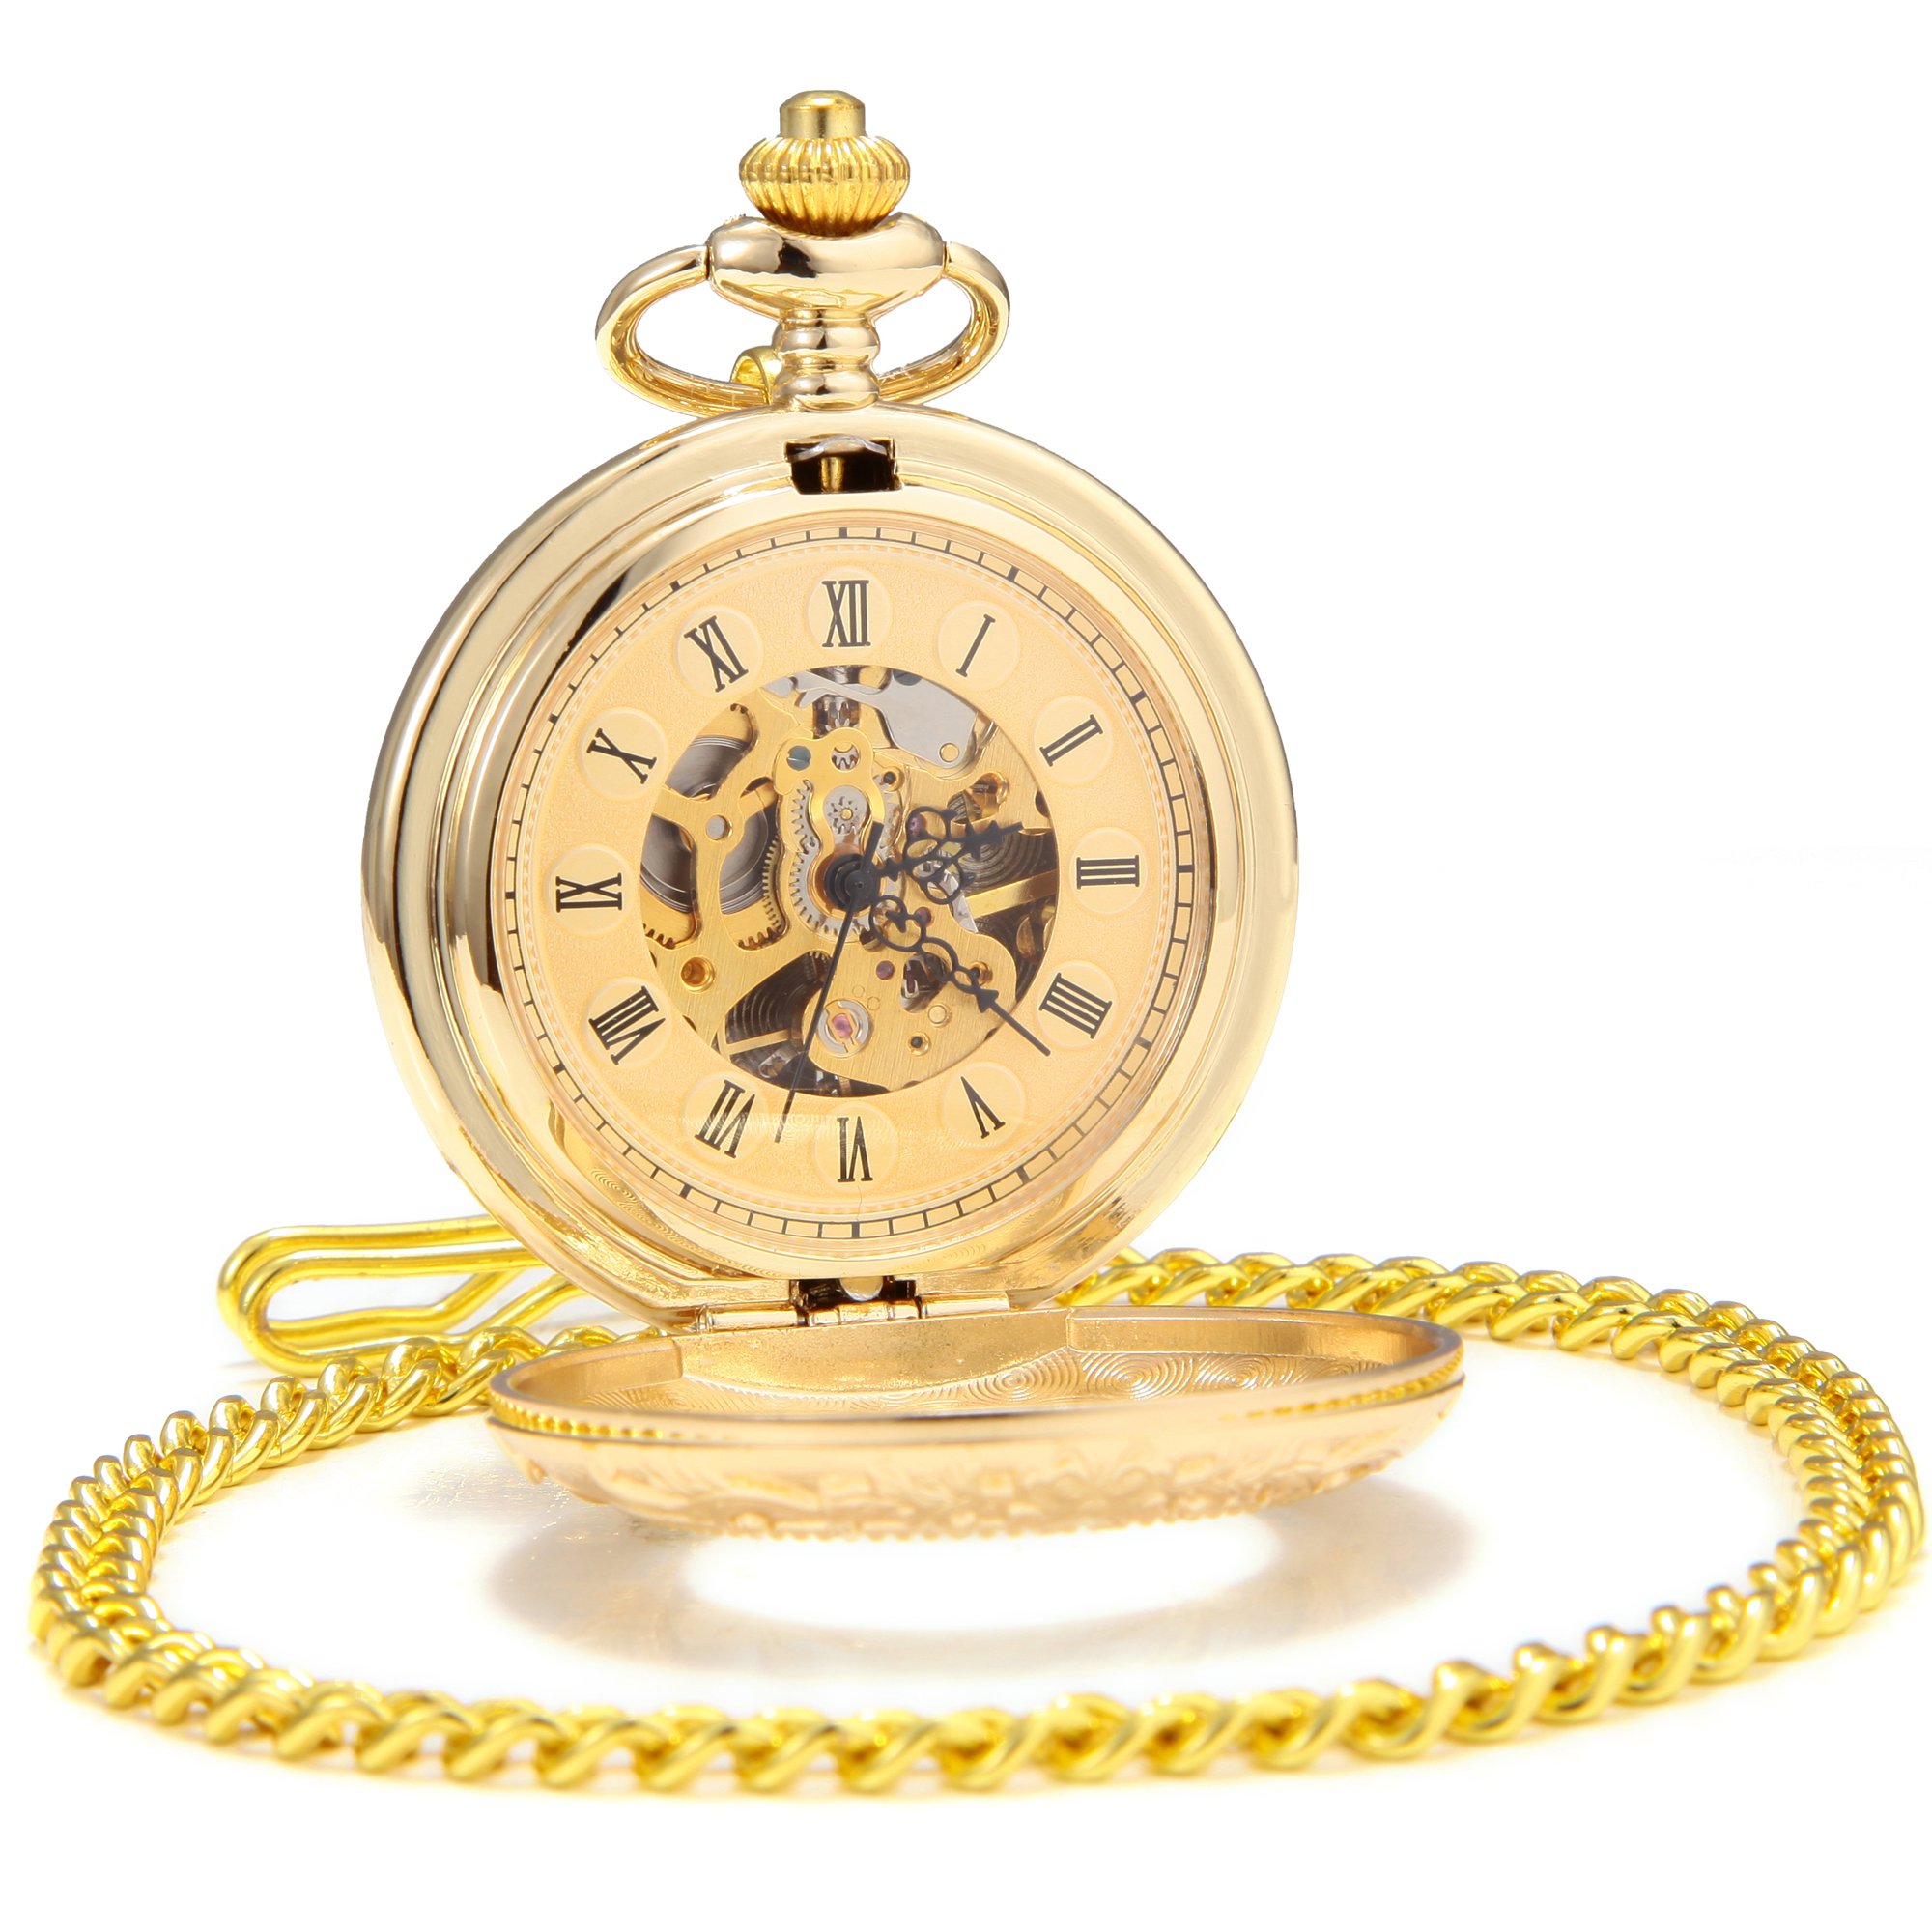 SEWOR Business Double Open Skeleton Pocket Watch with Chain, Mechanical Hand Wind Movement Full Hunter